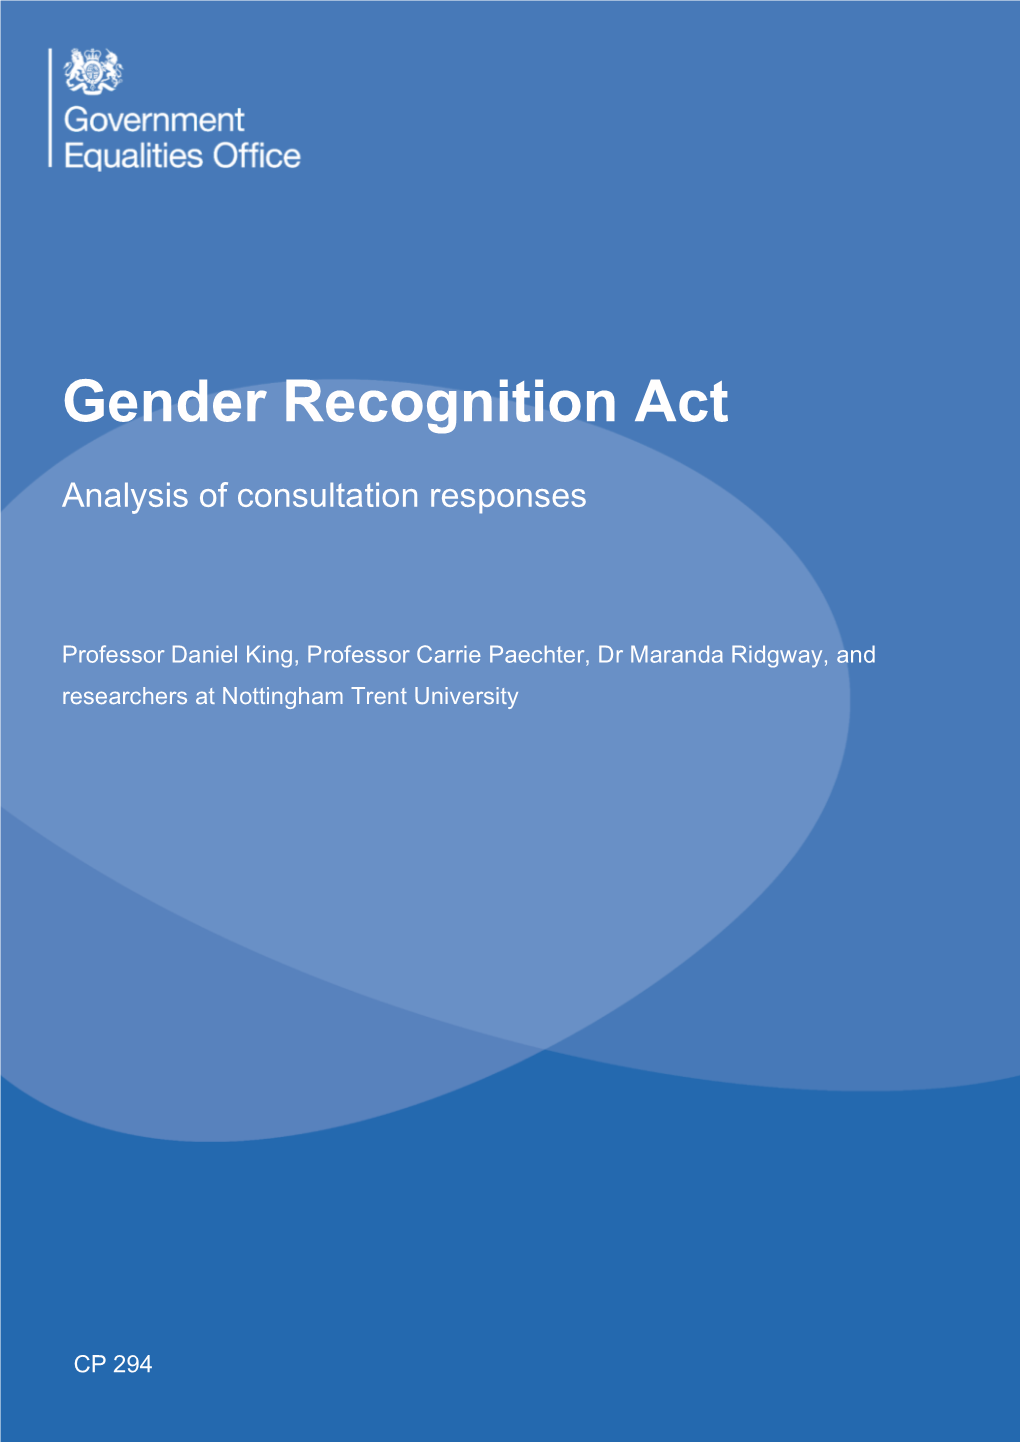 Gender Recognition Act – Analysis of Consultation Responses